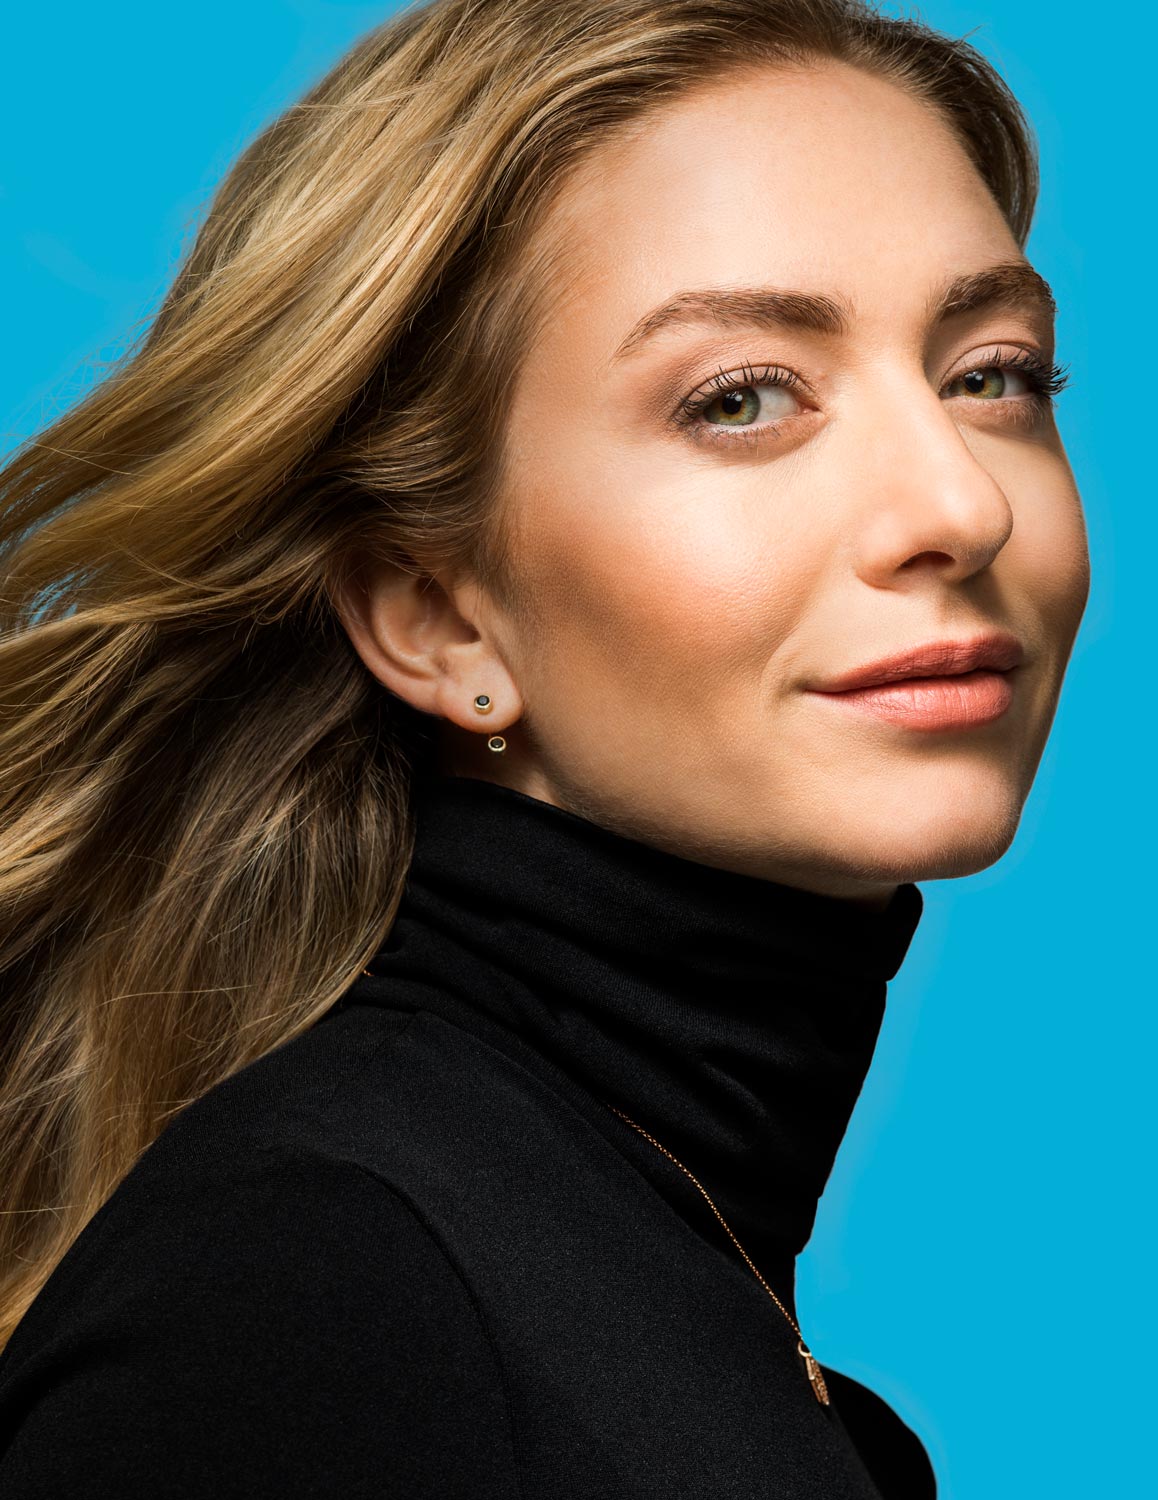 BUMBLE CEO WHITNEY WOLFE HERD, WIRED U.K.